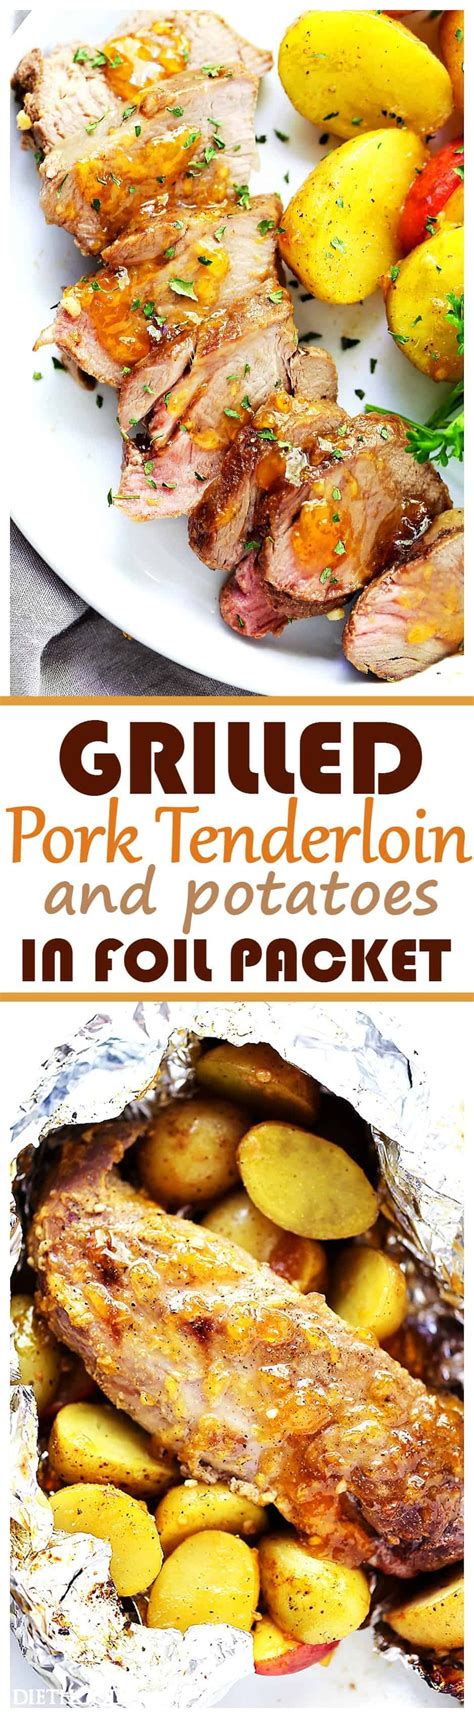 You may also broil it for a couple of minutes at the. Grilled Peach-Glazed Pork Tenderloin Foil Packet with Potatoes - Glazed with peach preserves and ...